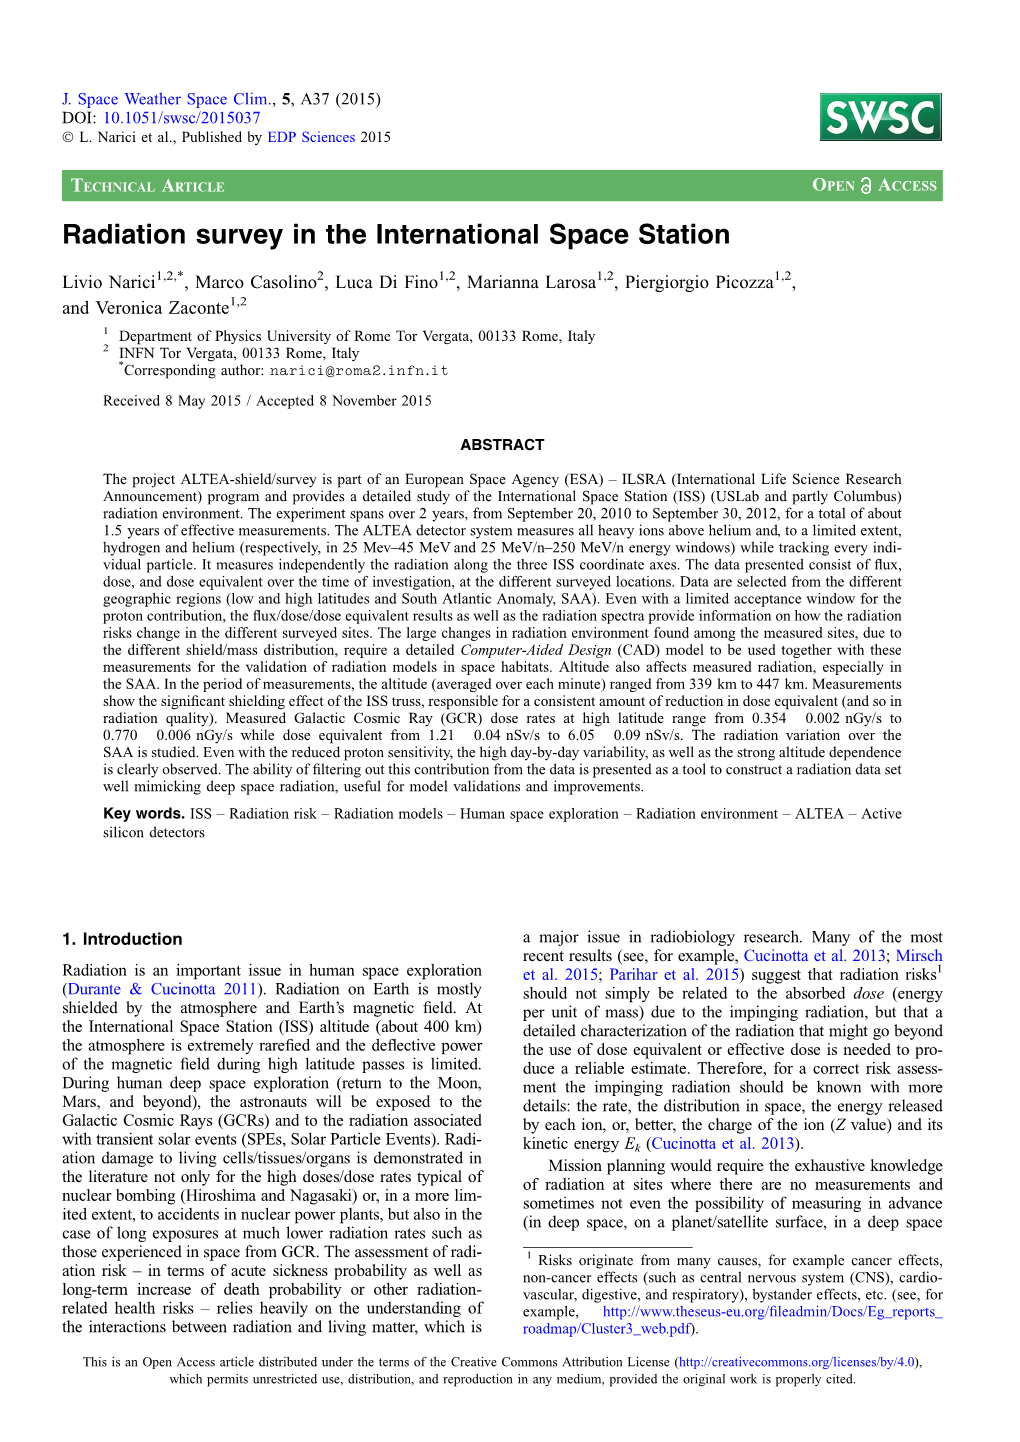 Radiation Survey in the International Space Station